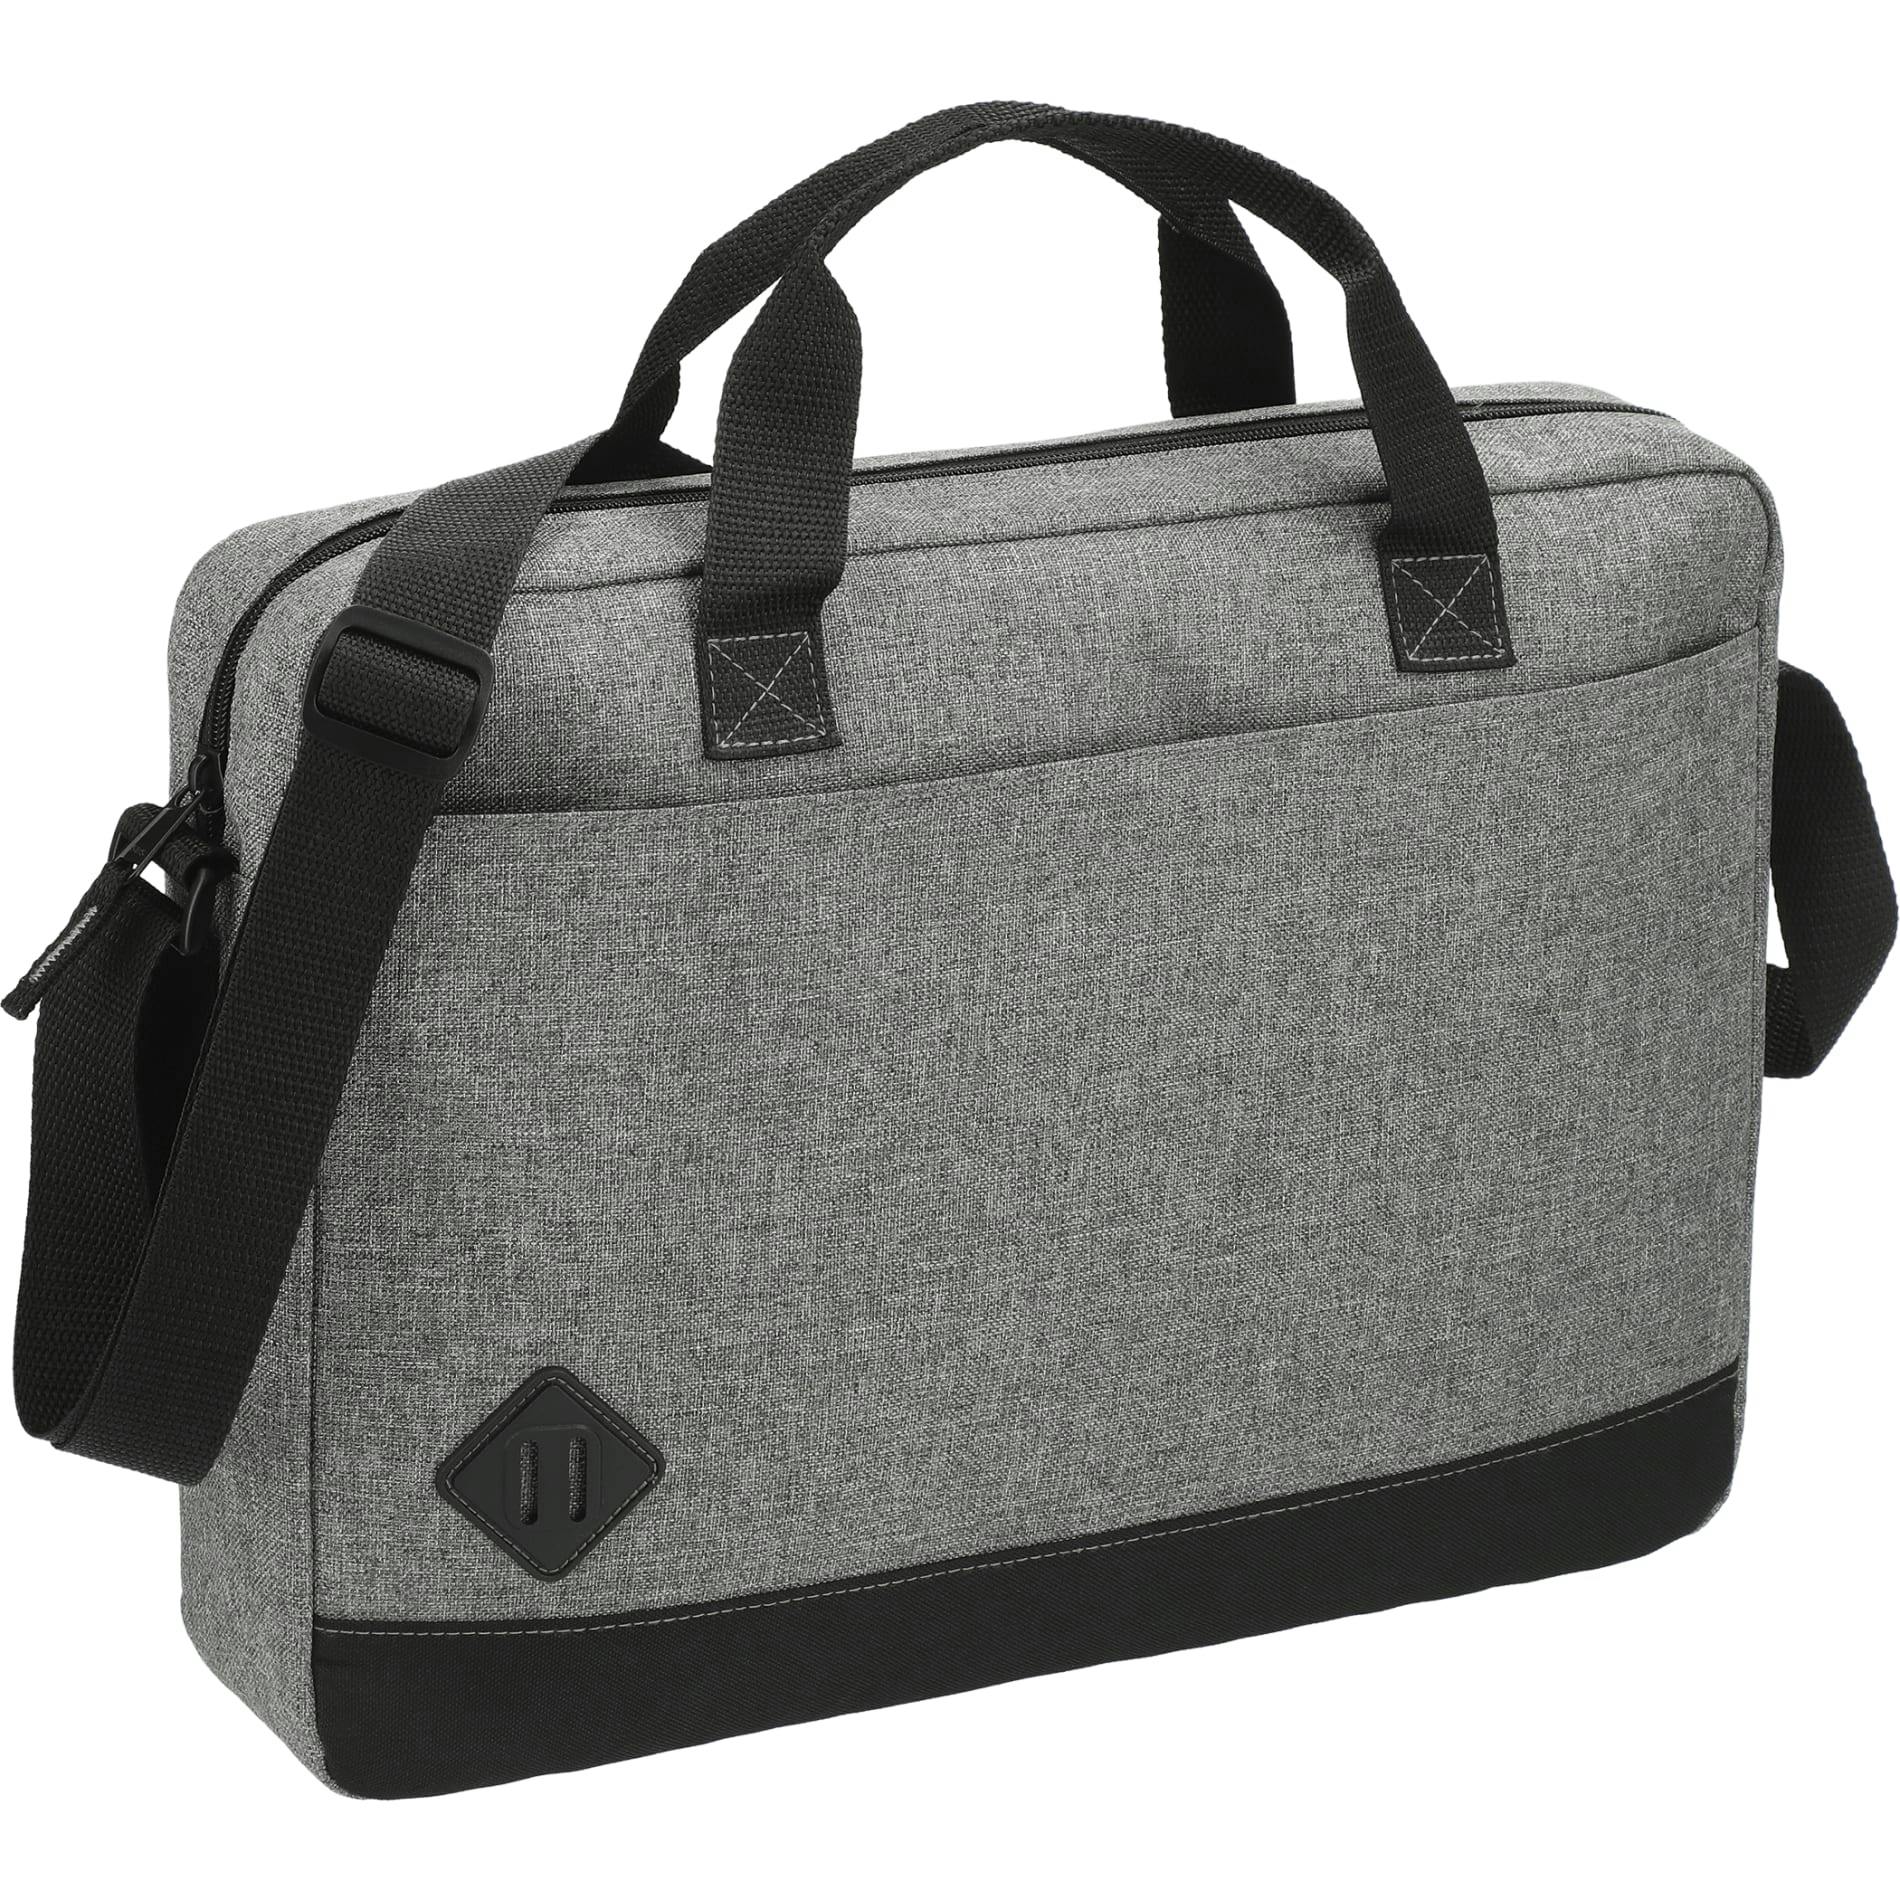 Graphite Dome 15" Computer Business Case - additional Image 3